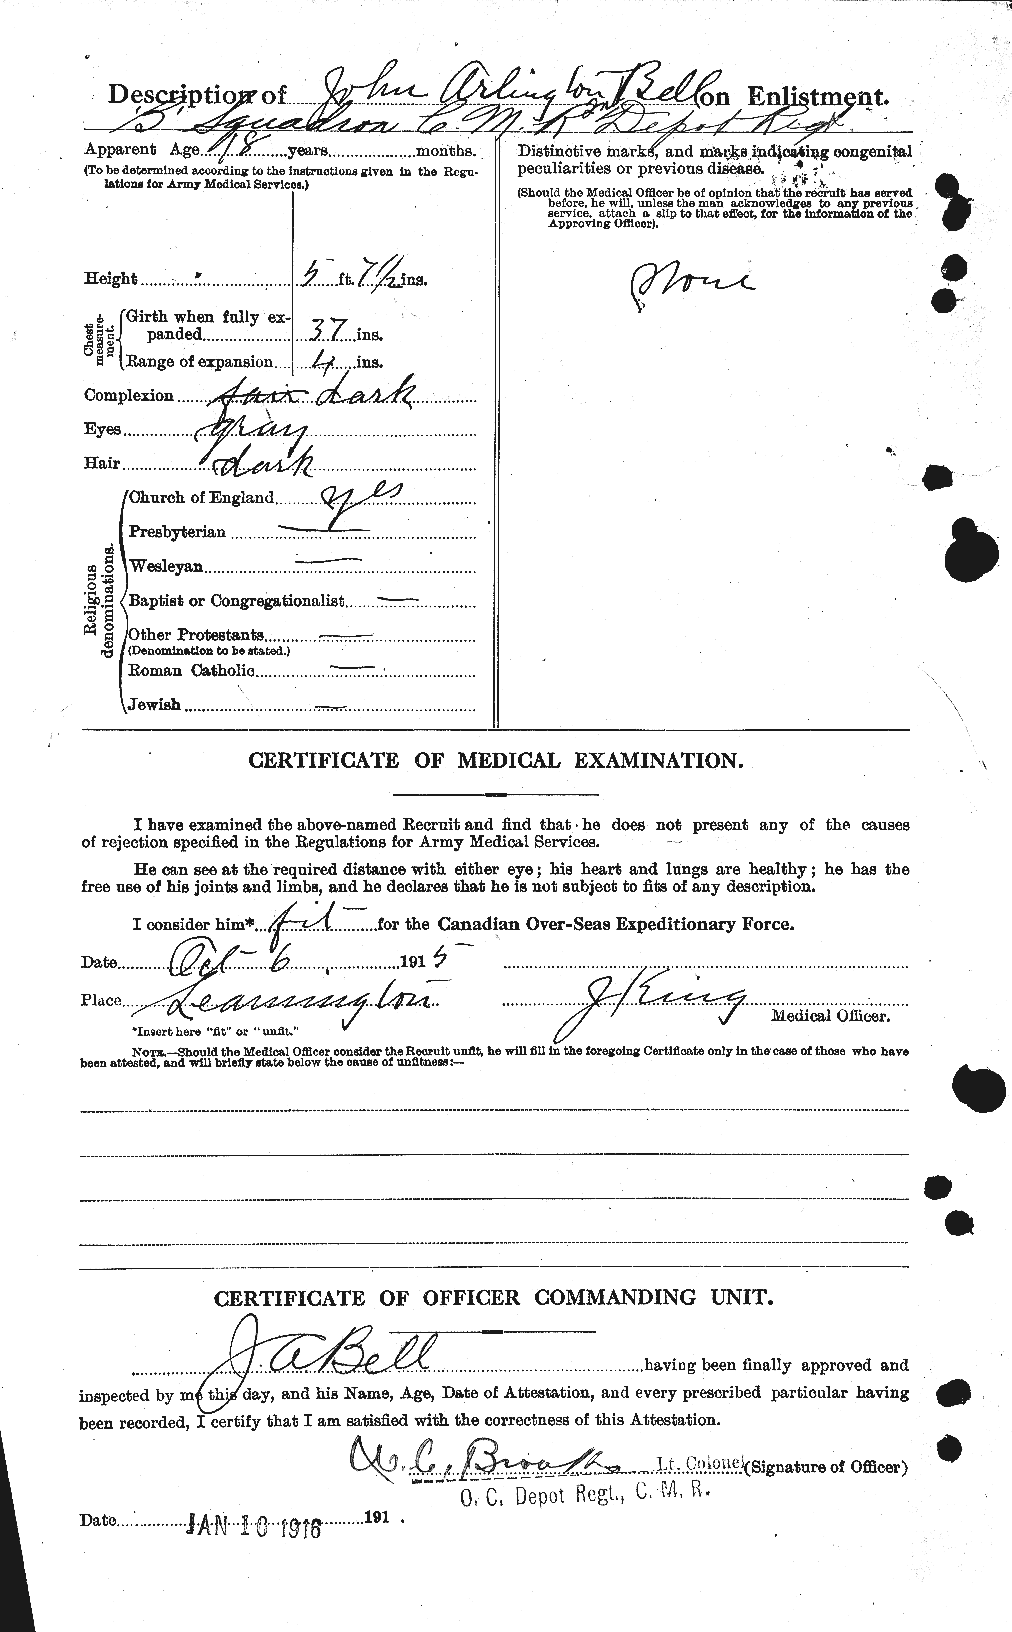 Personnel Records of the First World War - CEF 234390b